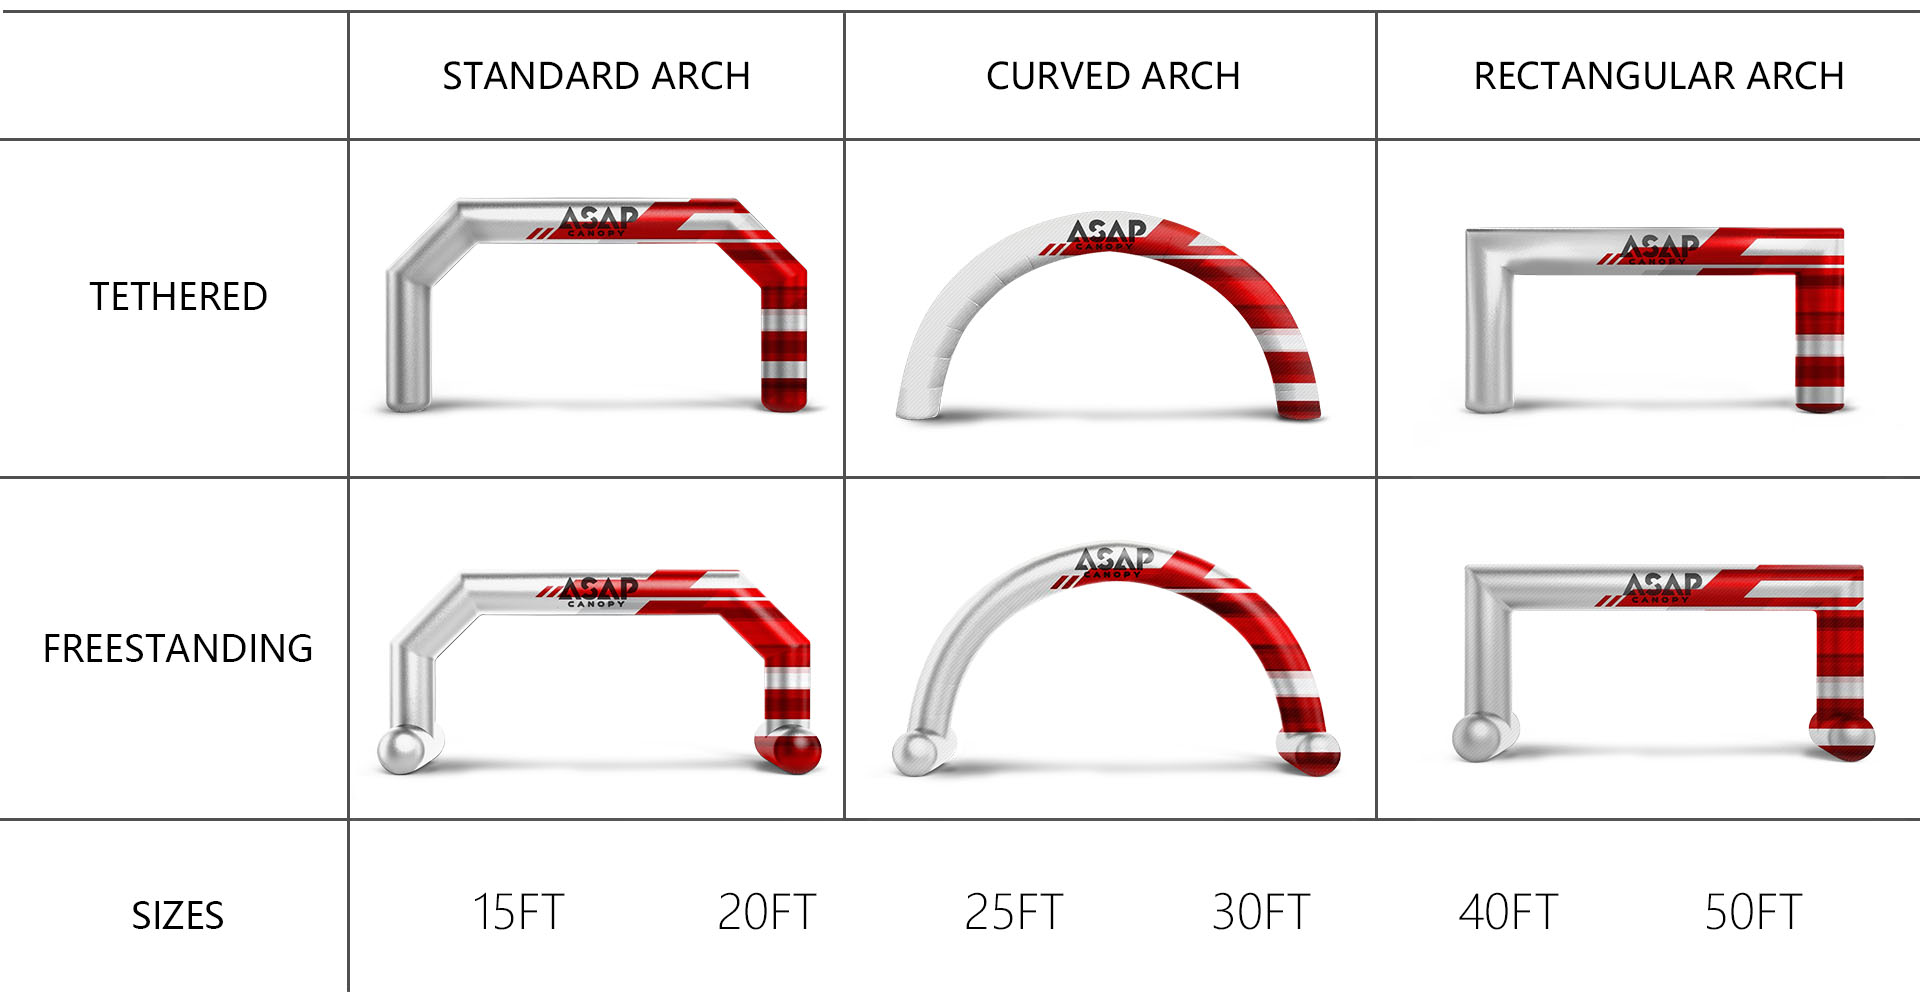 A variety of custom arch options are available, including inflatable methods, arch shapes, sizes, and added T-angles.